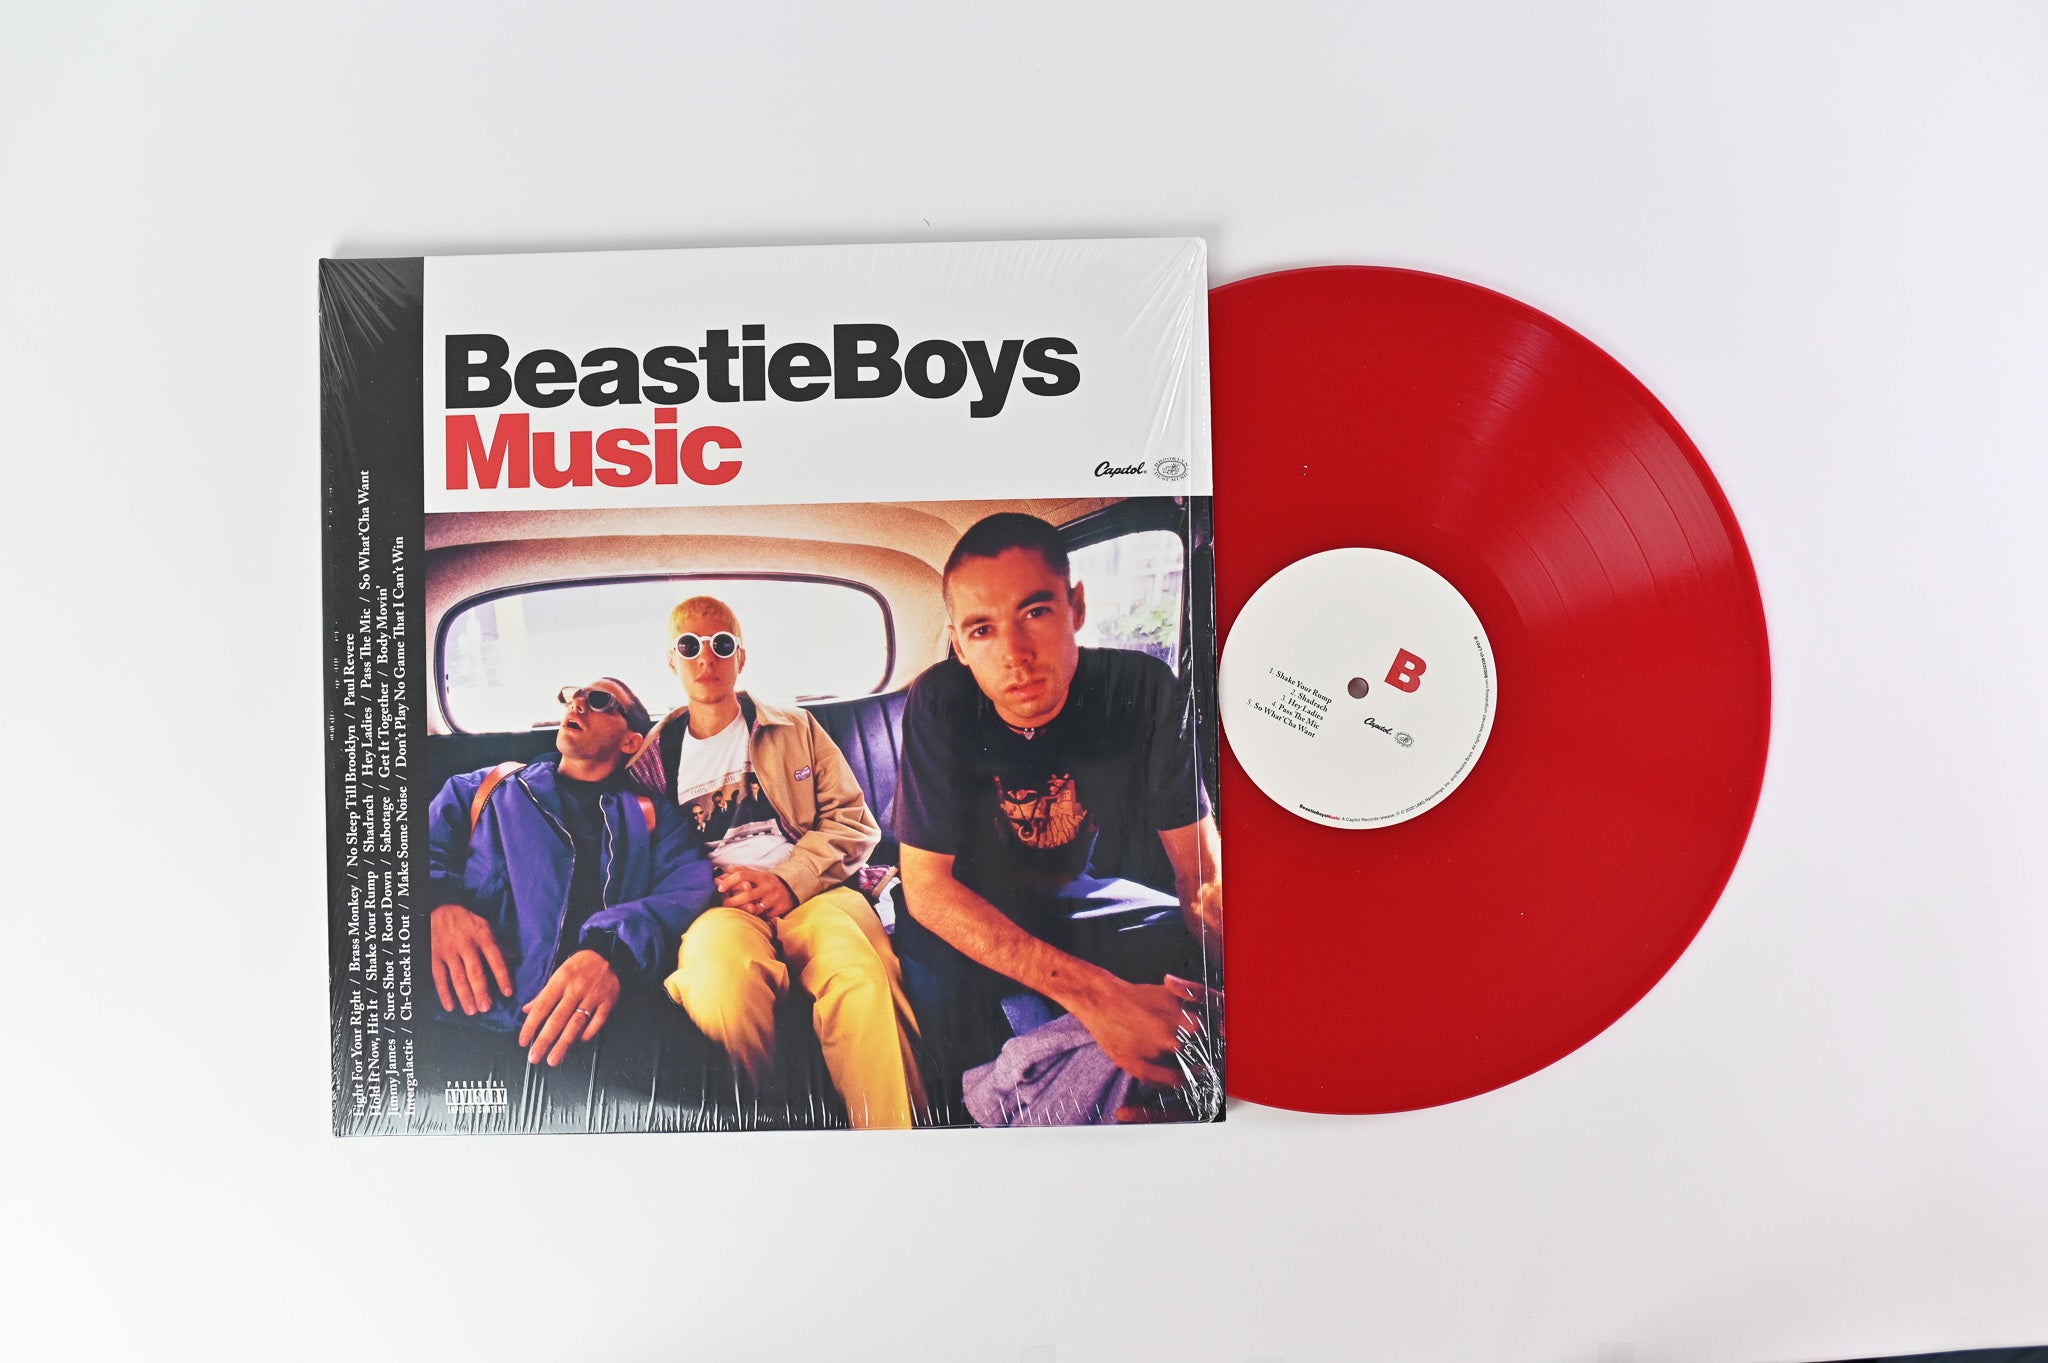 Beastie Boys - Beastie Boys Music on Capitol Ltd Red and White Opaque